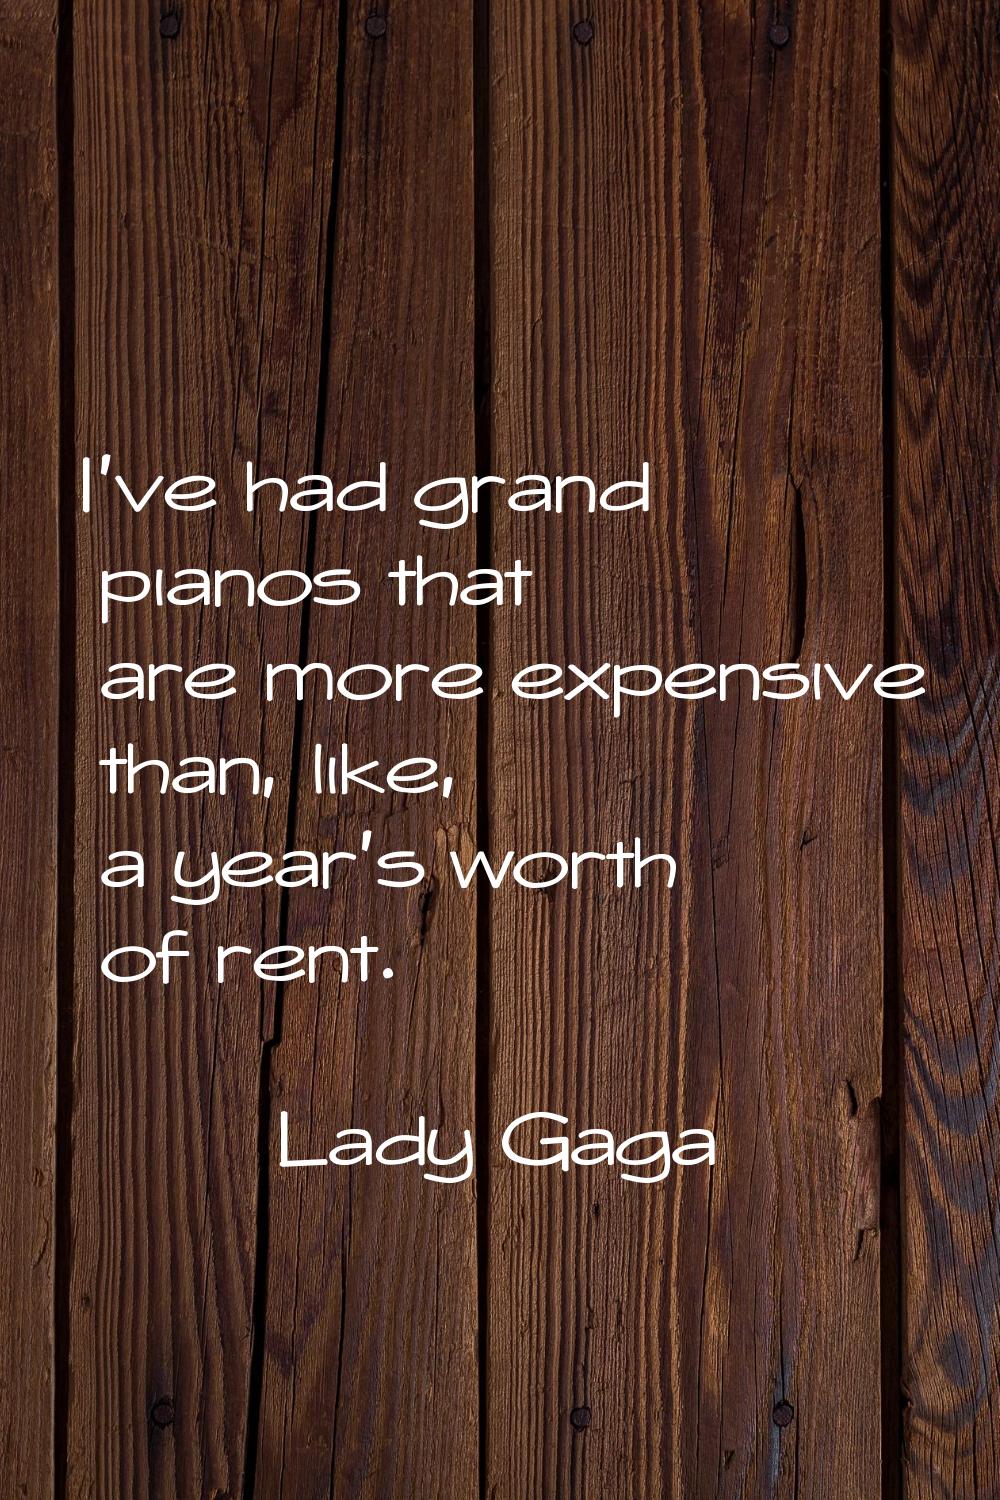 I've had grand pianos that are more expensive than, like, a year's worth of rent.